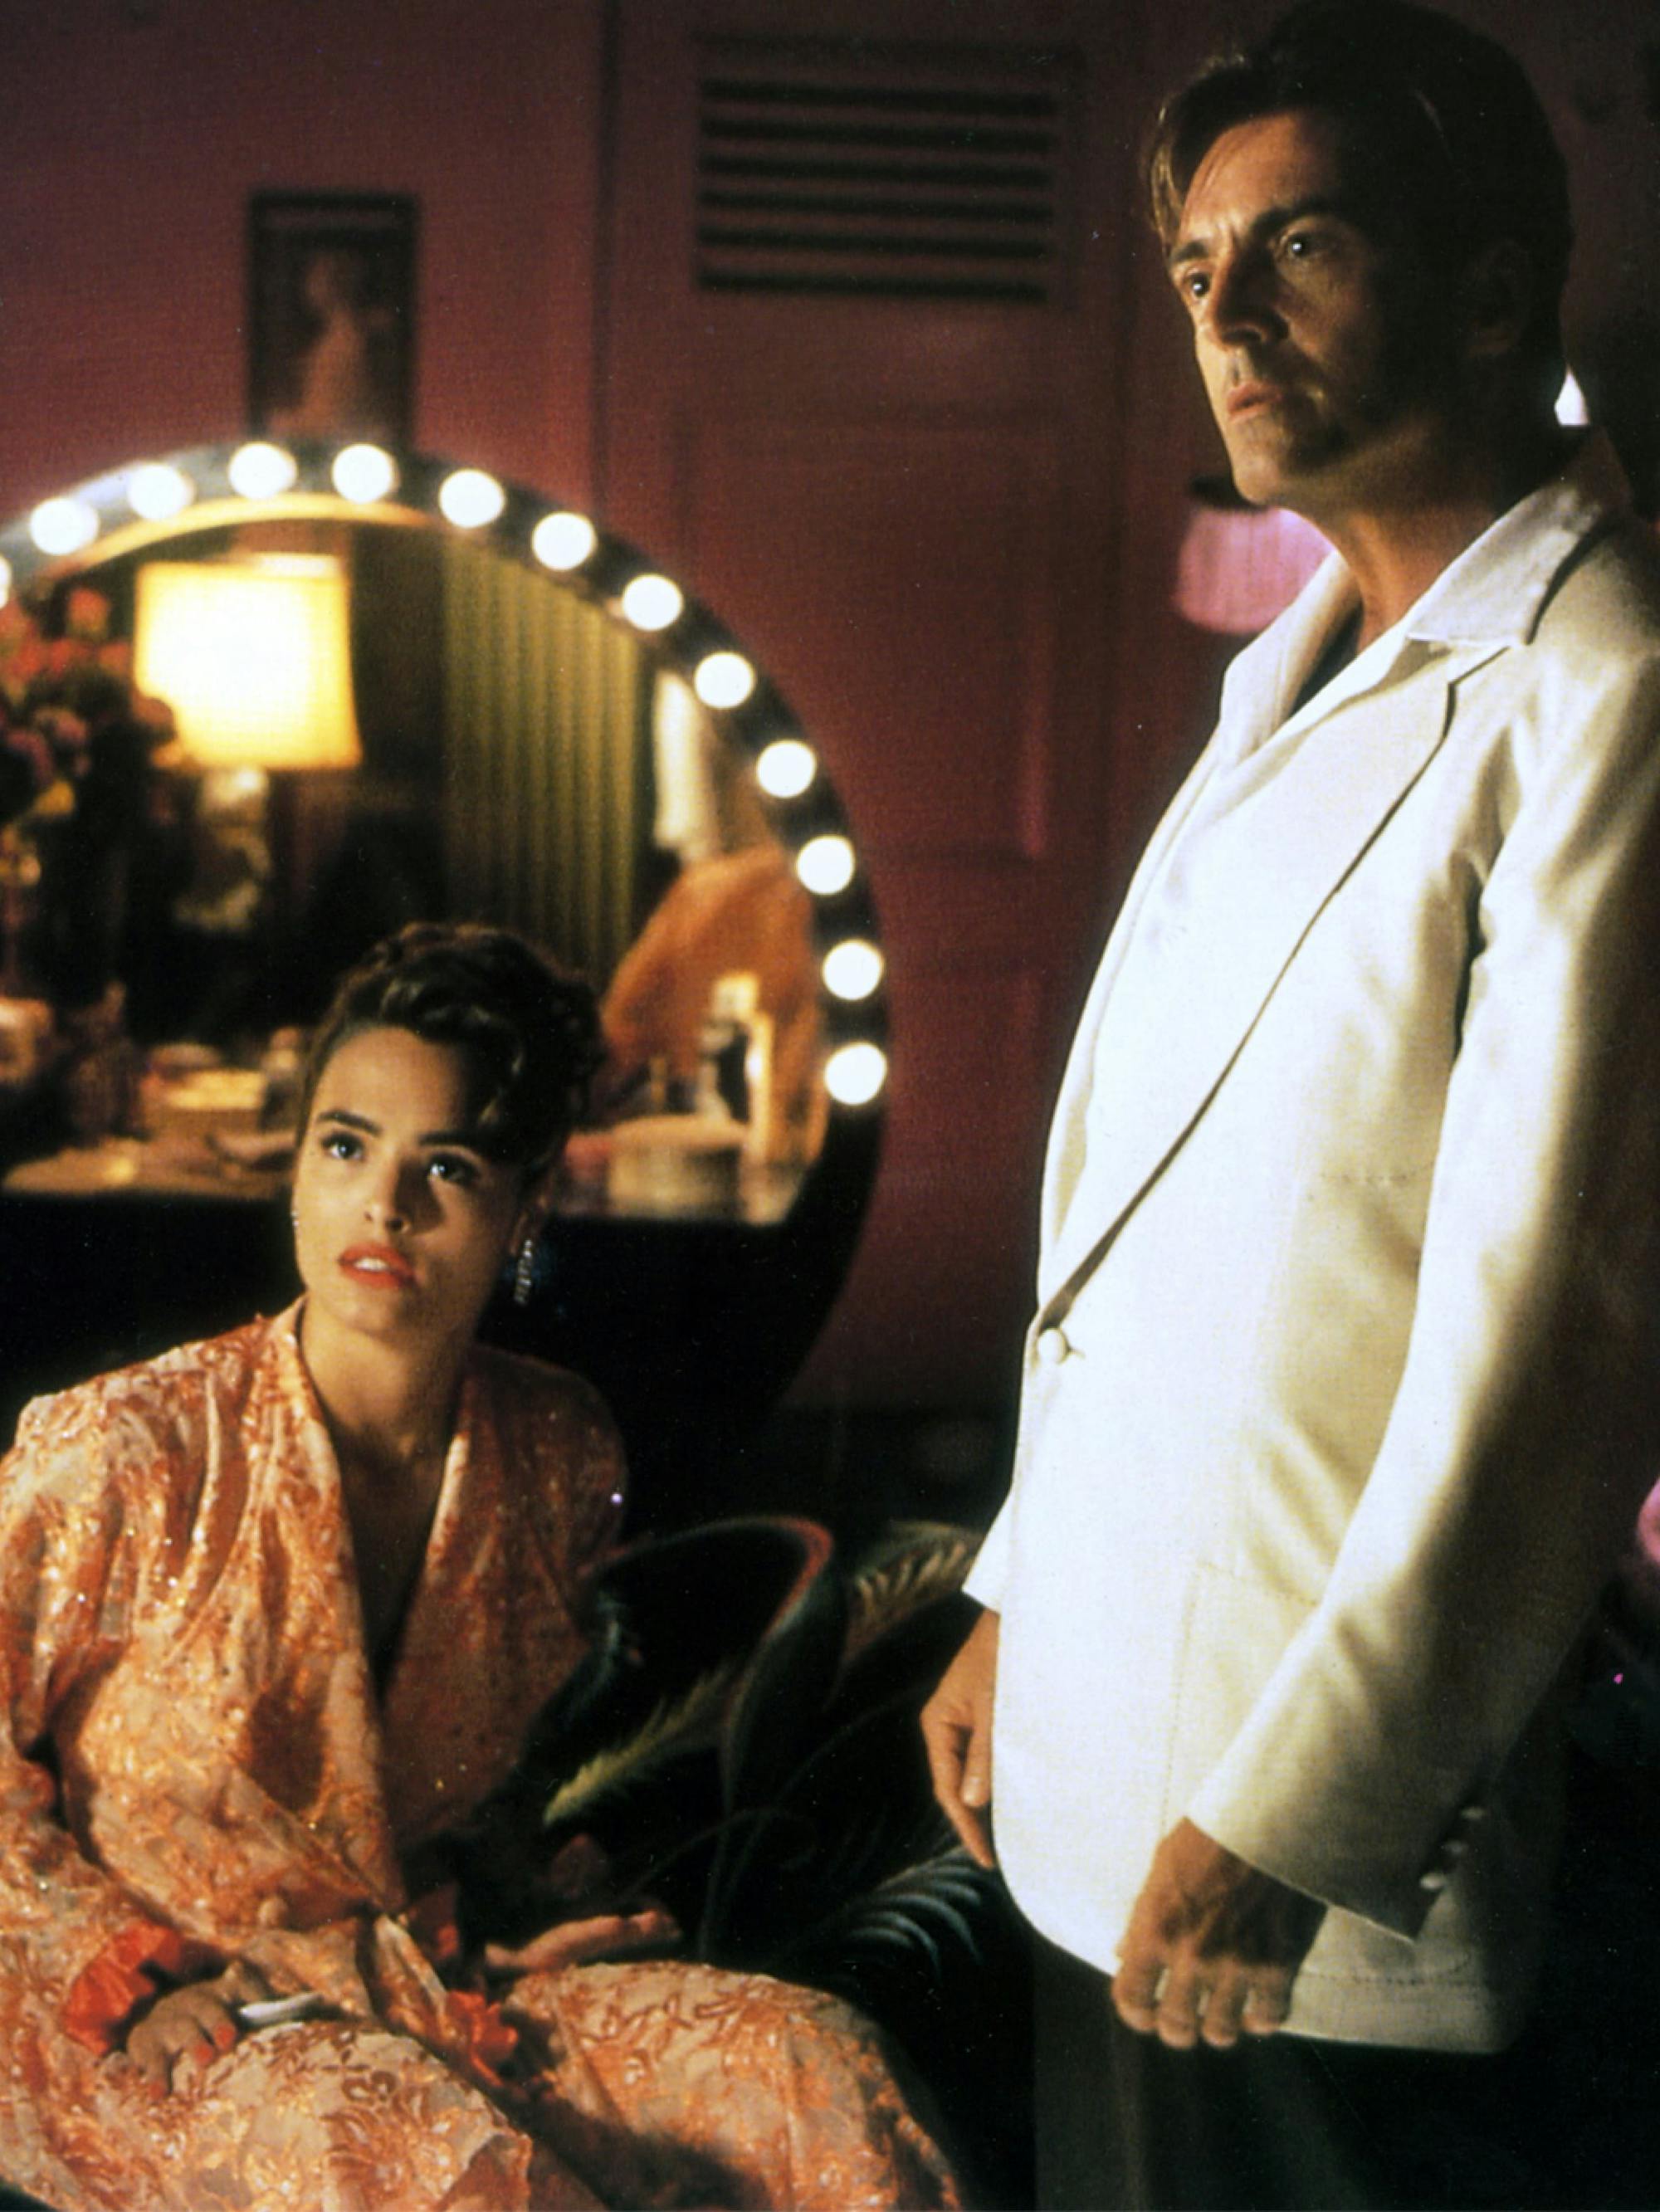 Talisa Soto sits in a robe. Behind her there is a circle-mirrored vanity with lights bordering the mirror. Armand Assante stands to the left. 